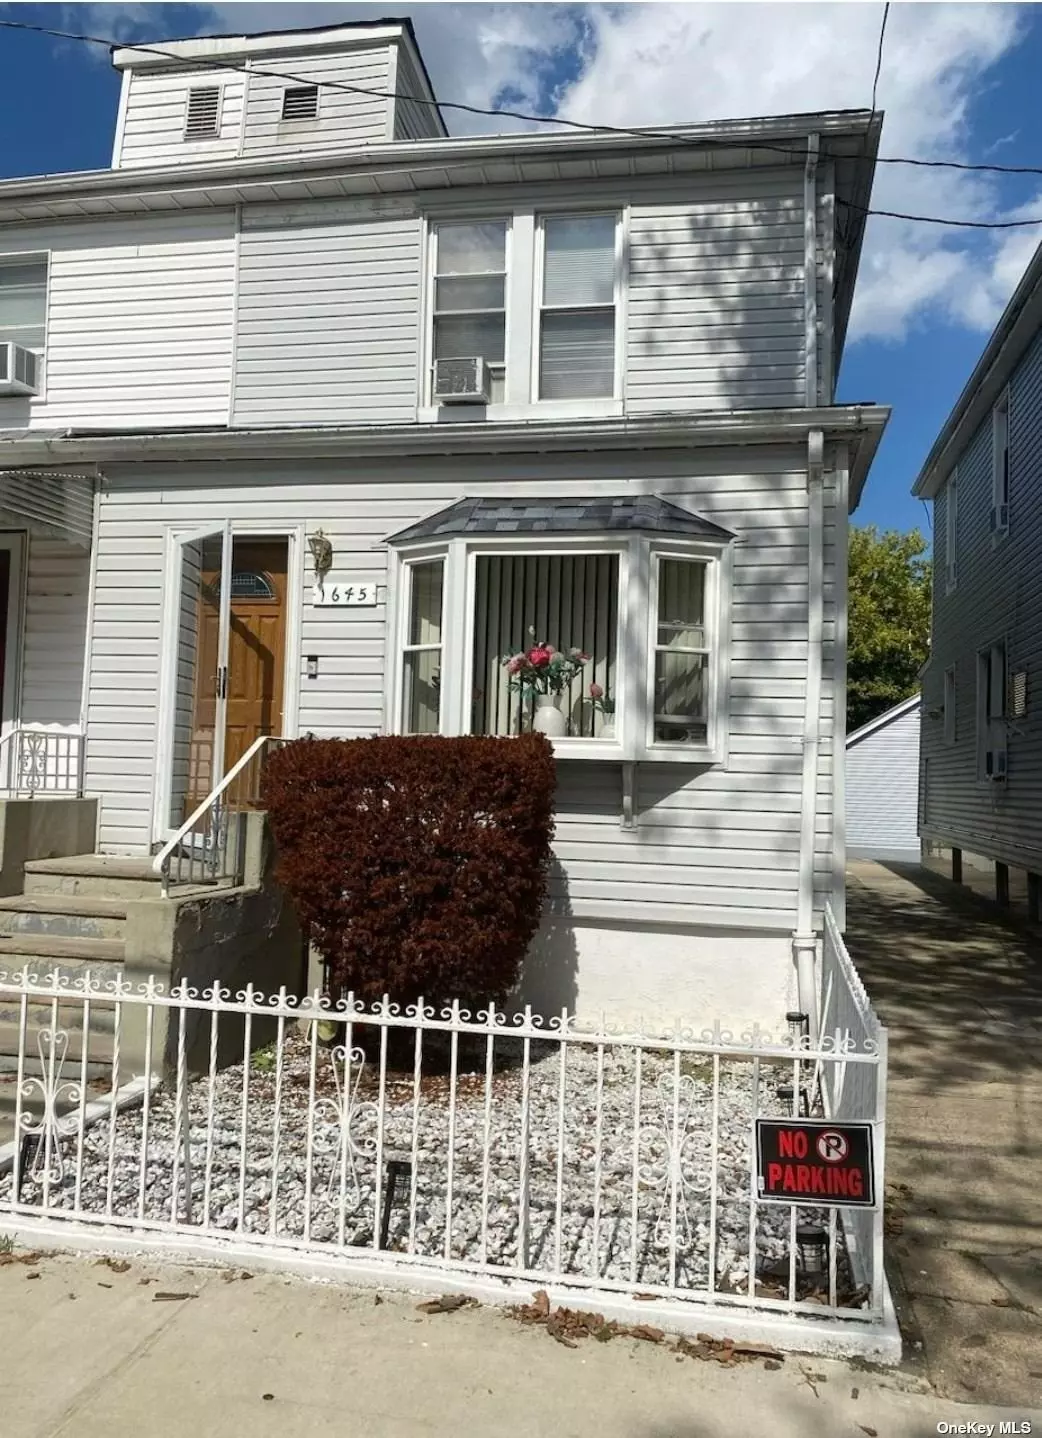 Welcome to your new home!!! This beautiful semi detached 1 family is located in Canarsie, Brooklyn. 3 bedrooms & 2 bathroom home. Livingroom, dining room, spacious finished basement & driveway. Close to transportation, walking distance from huge park. Solar Panels already installed MOTIVATED seller Open to all offers!